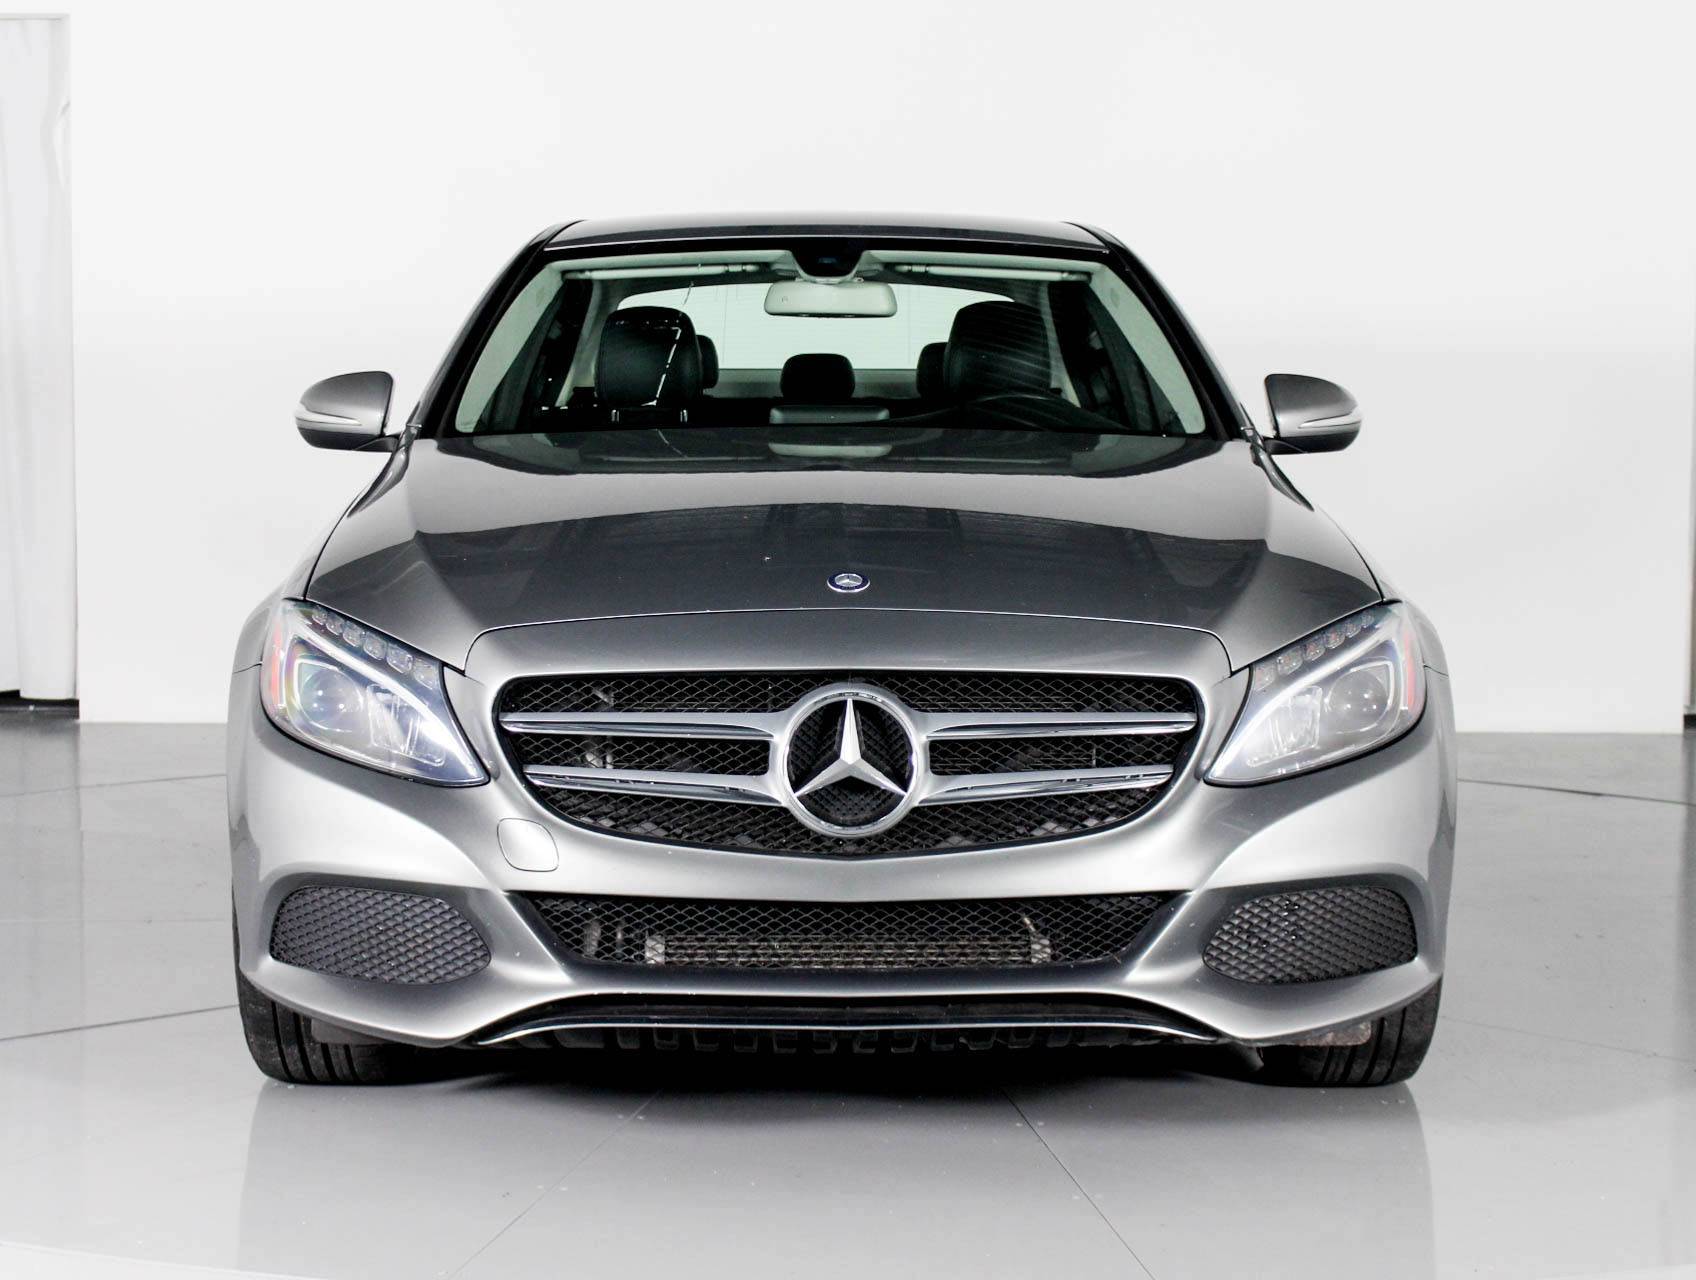 Florida Fine Cars - Used MERCEDES-BENZ C CLASS 2015 WEST PALM C300 4MATIC